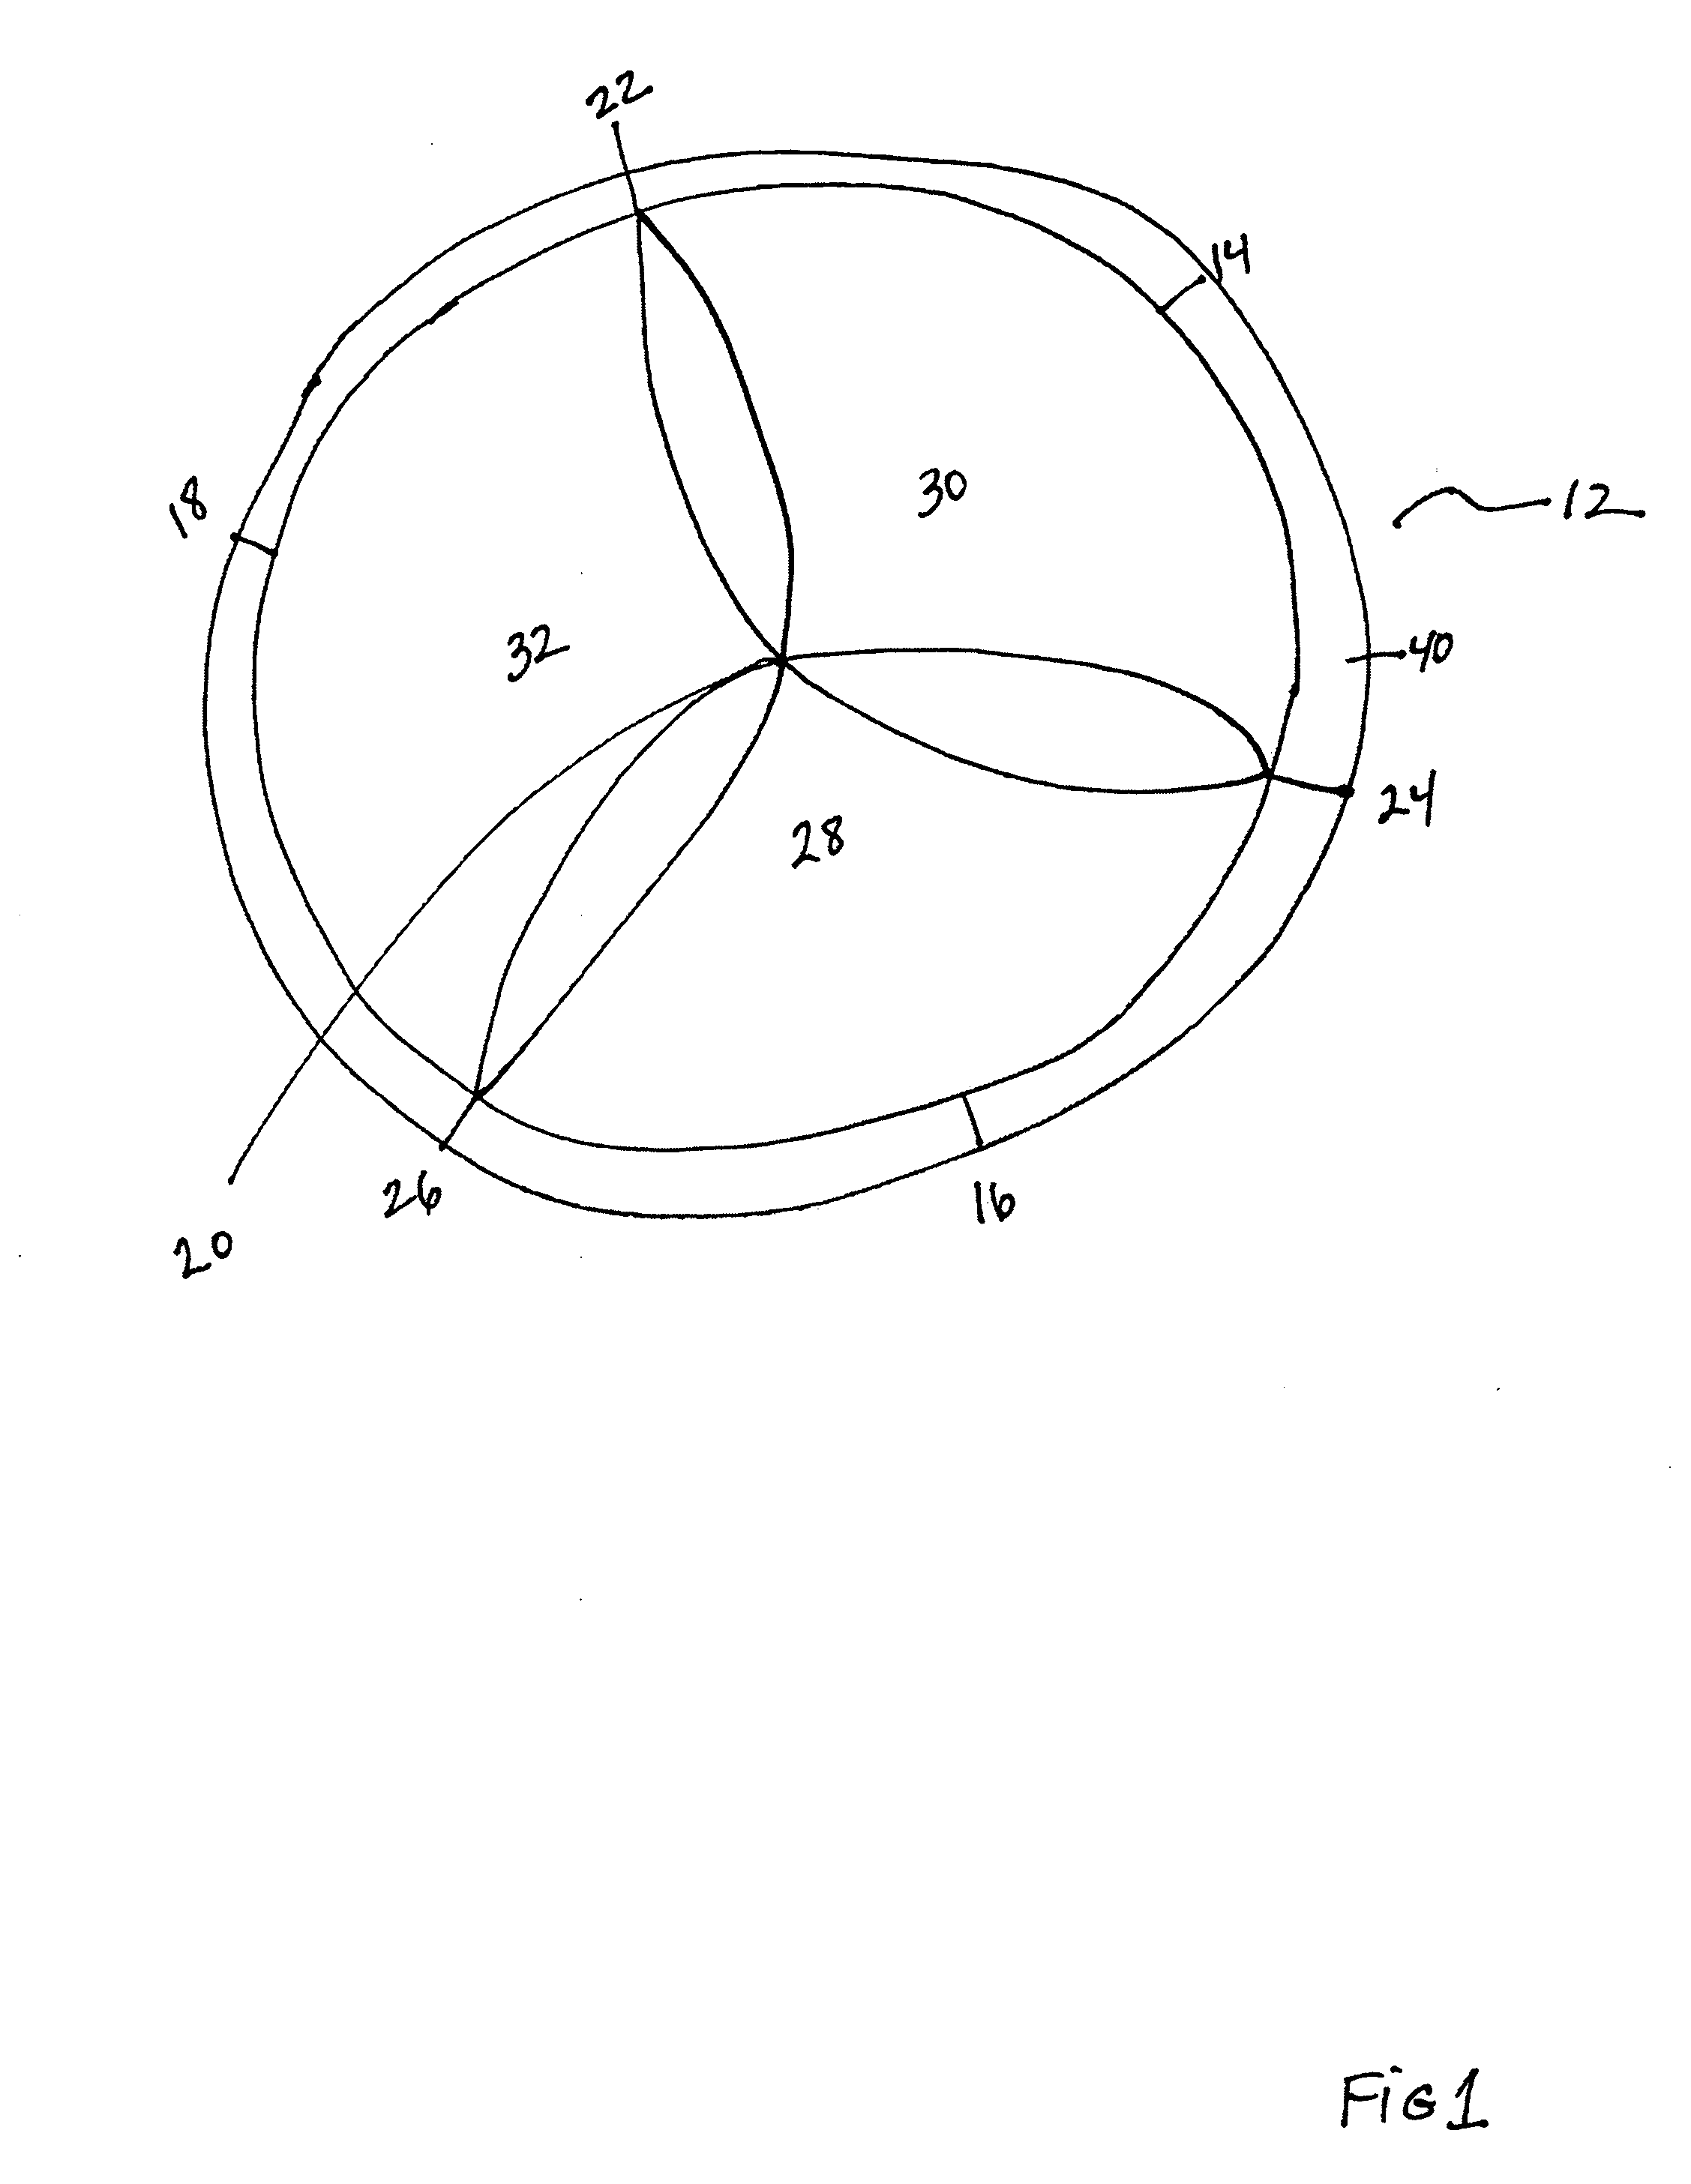 Sewing Ring for a Prosthetic Tissue Valve